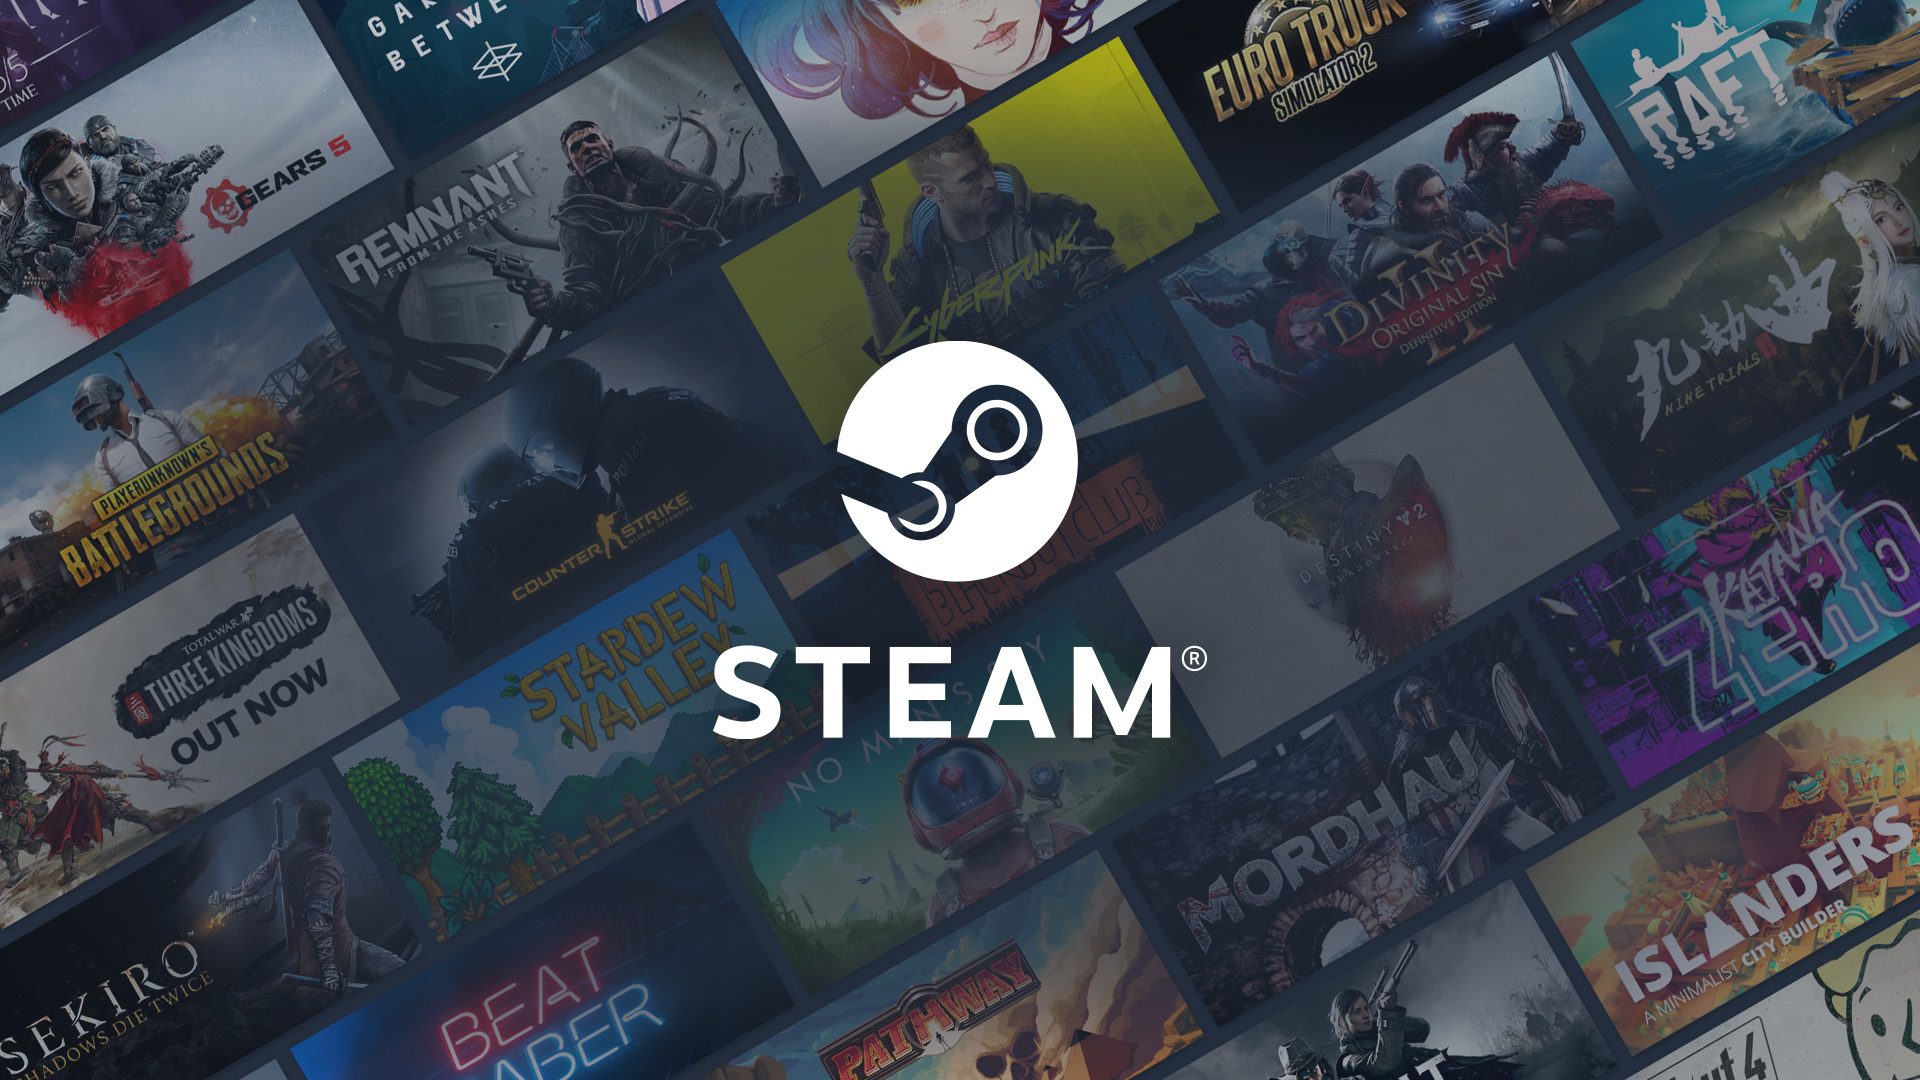 Valve published the full Steam sale dates for the rest of the year